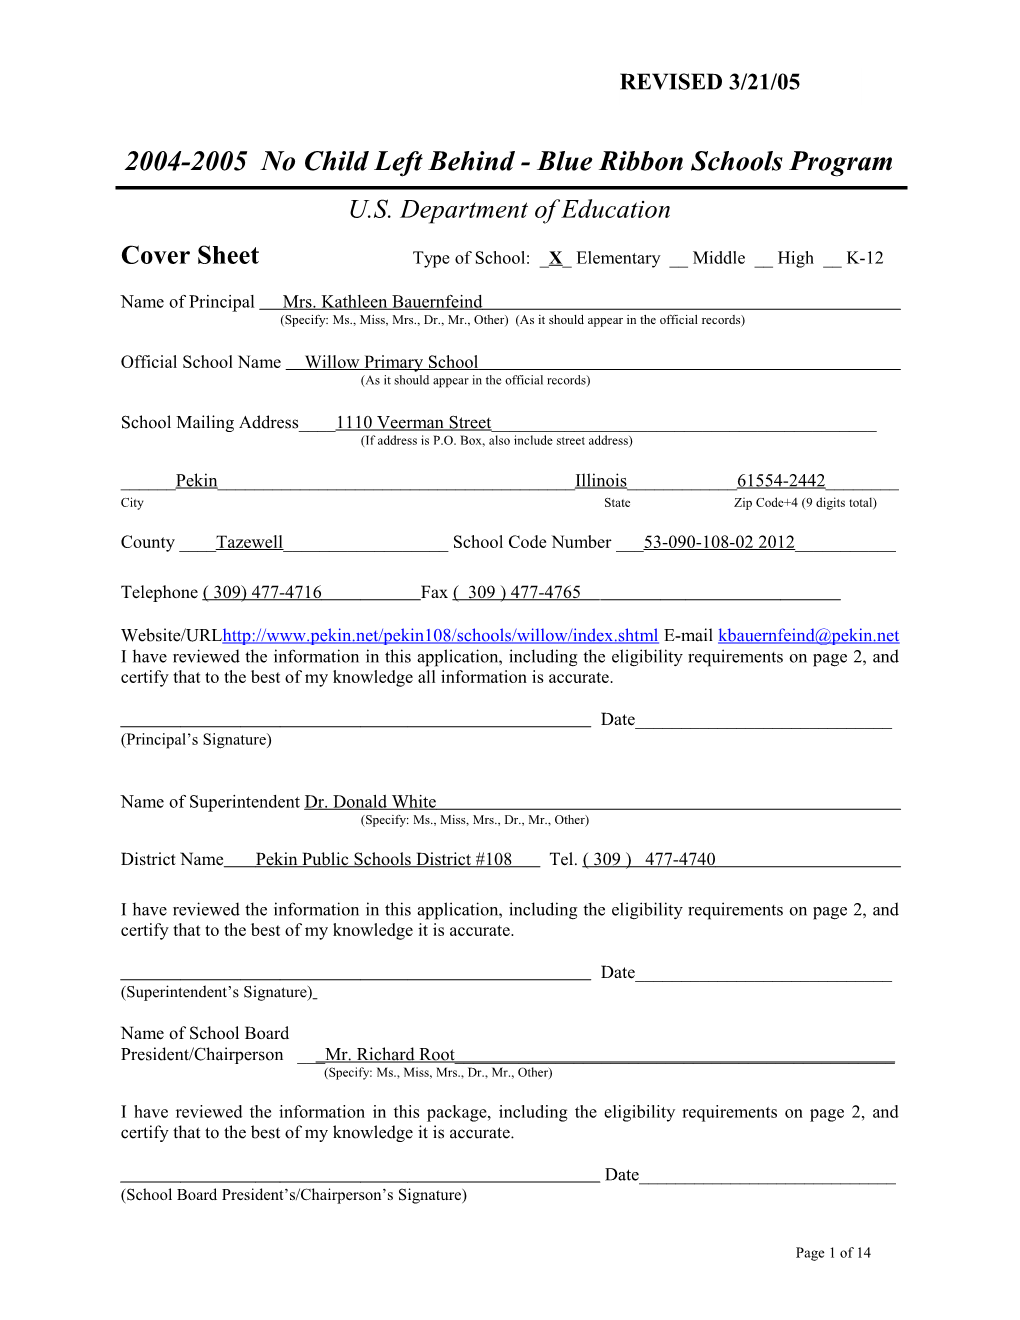 Willow Primary School Application: 2004-2005, No Child Left Behind - Blue Ribbon Schools